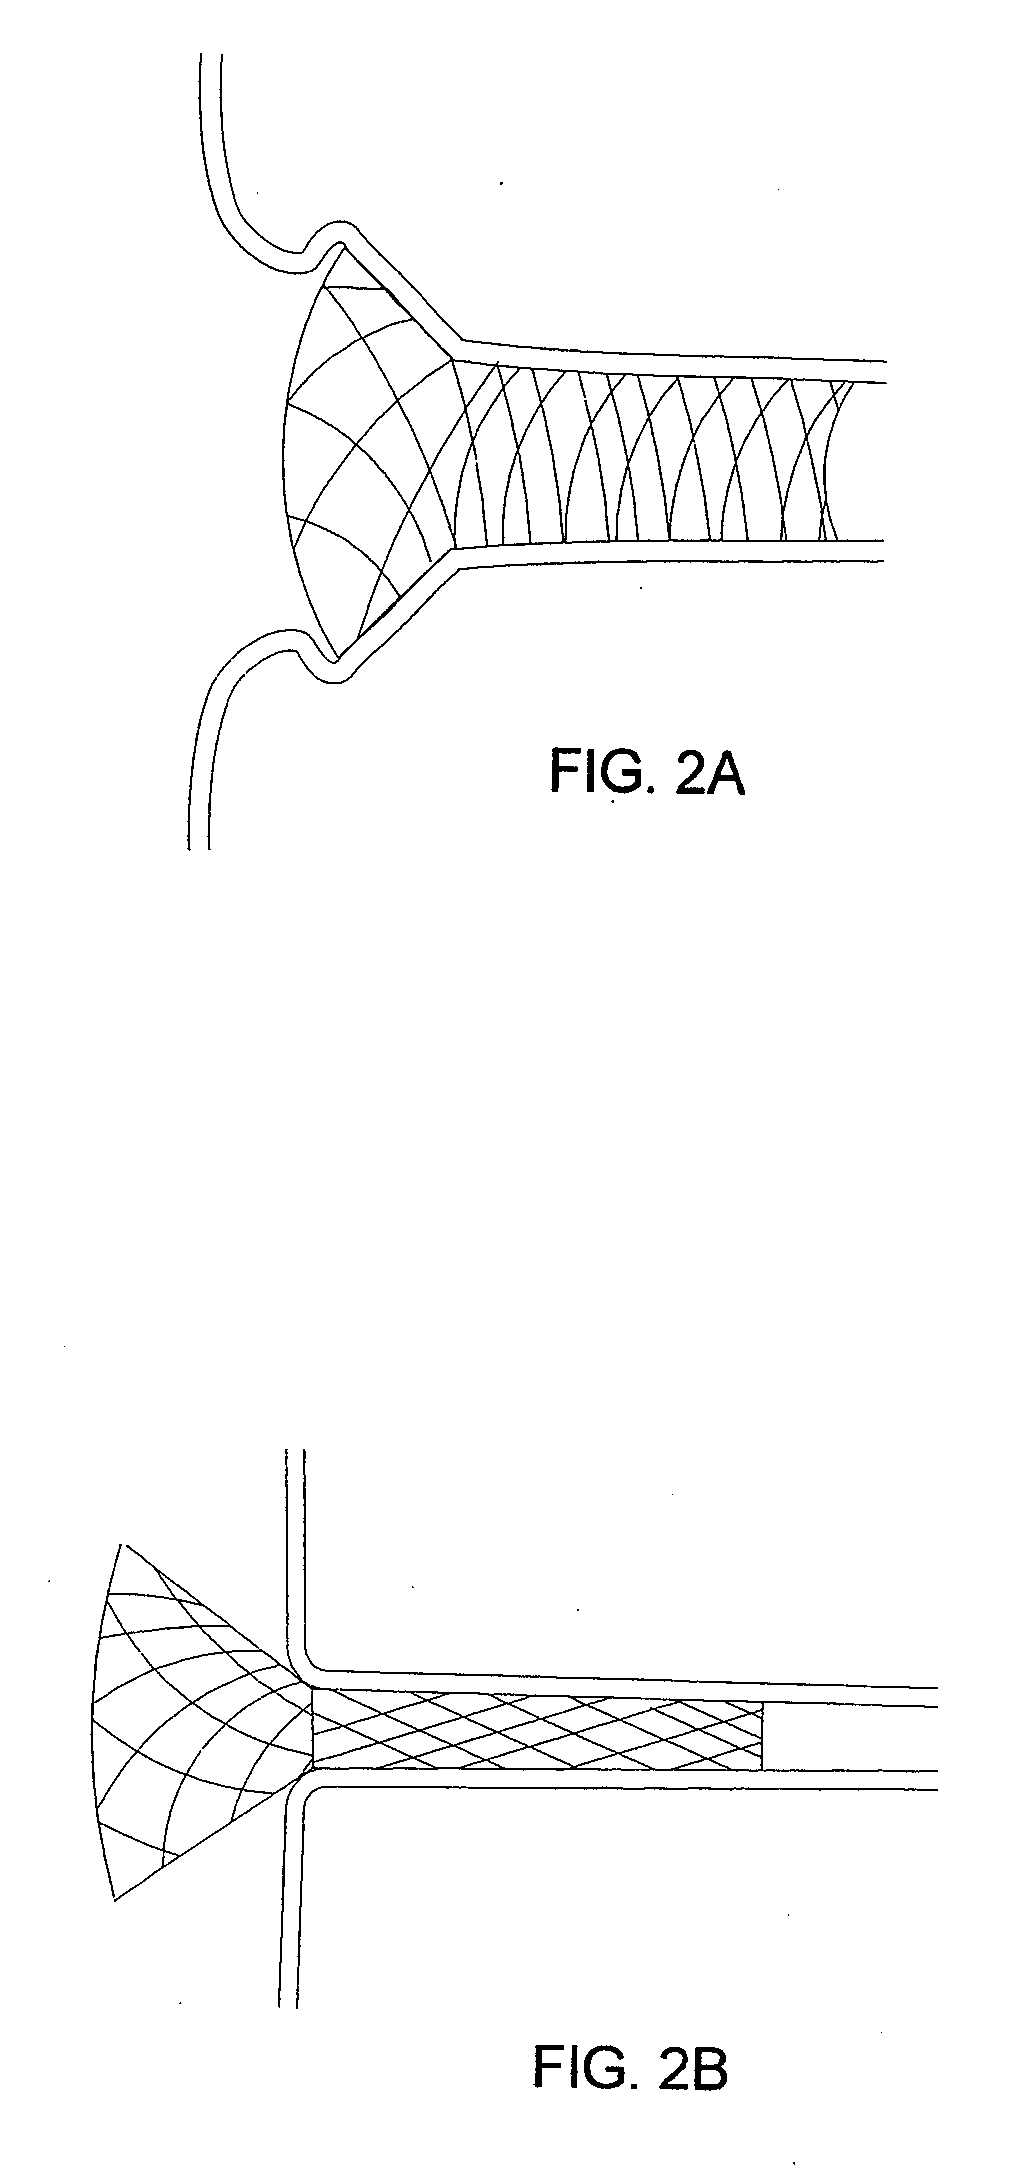 Axially compressible flared stents and apparatus and methods for delivering them